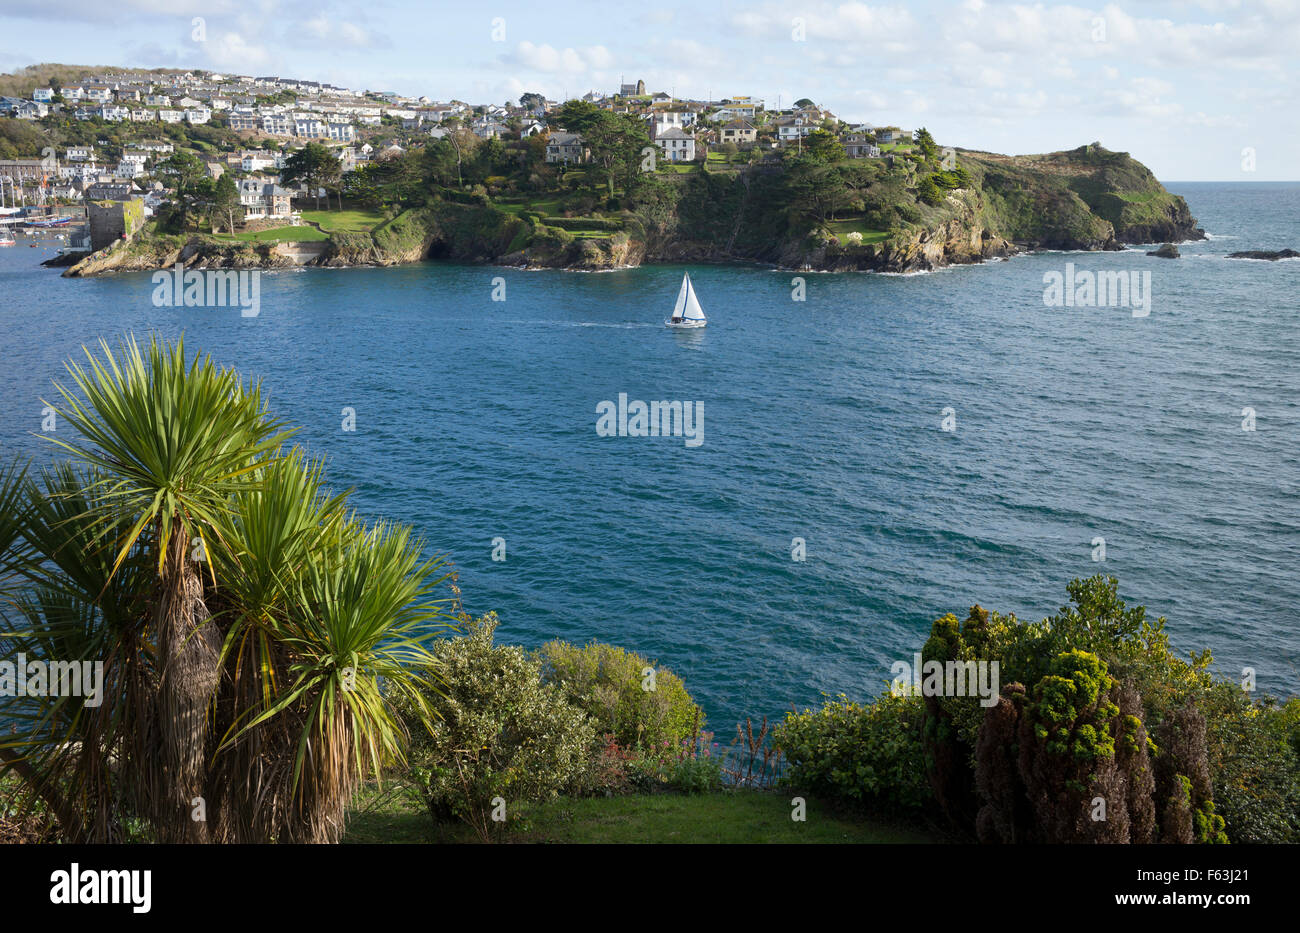 A yacht on the mouth of the River Fowey in Cornwall, UK Stock Photo